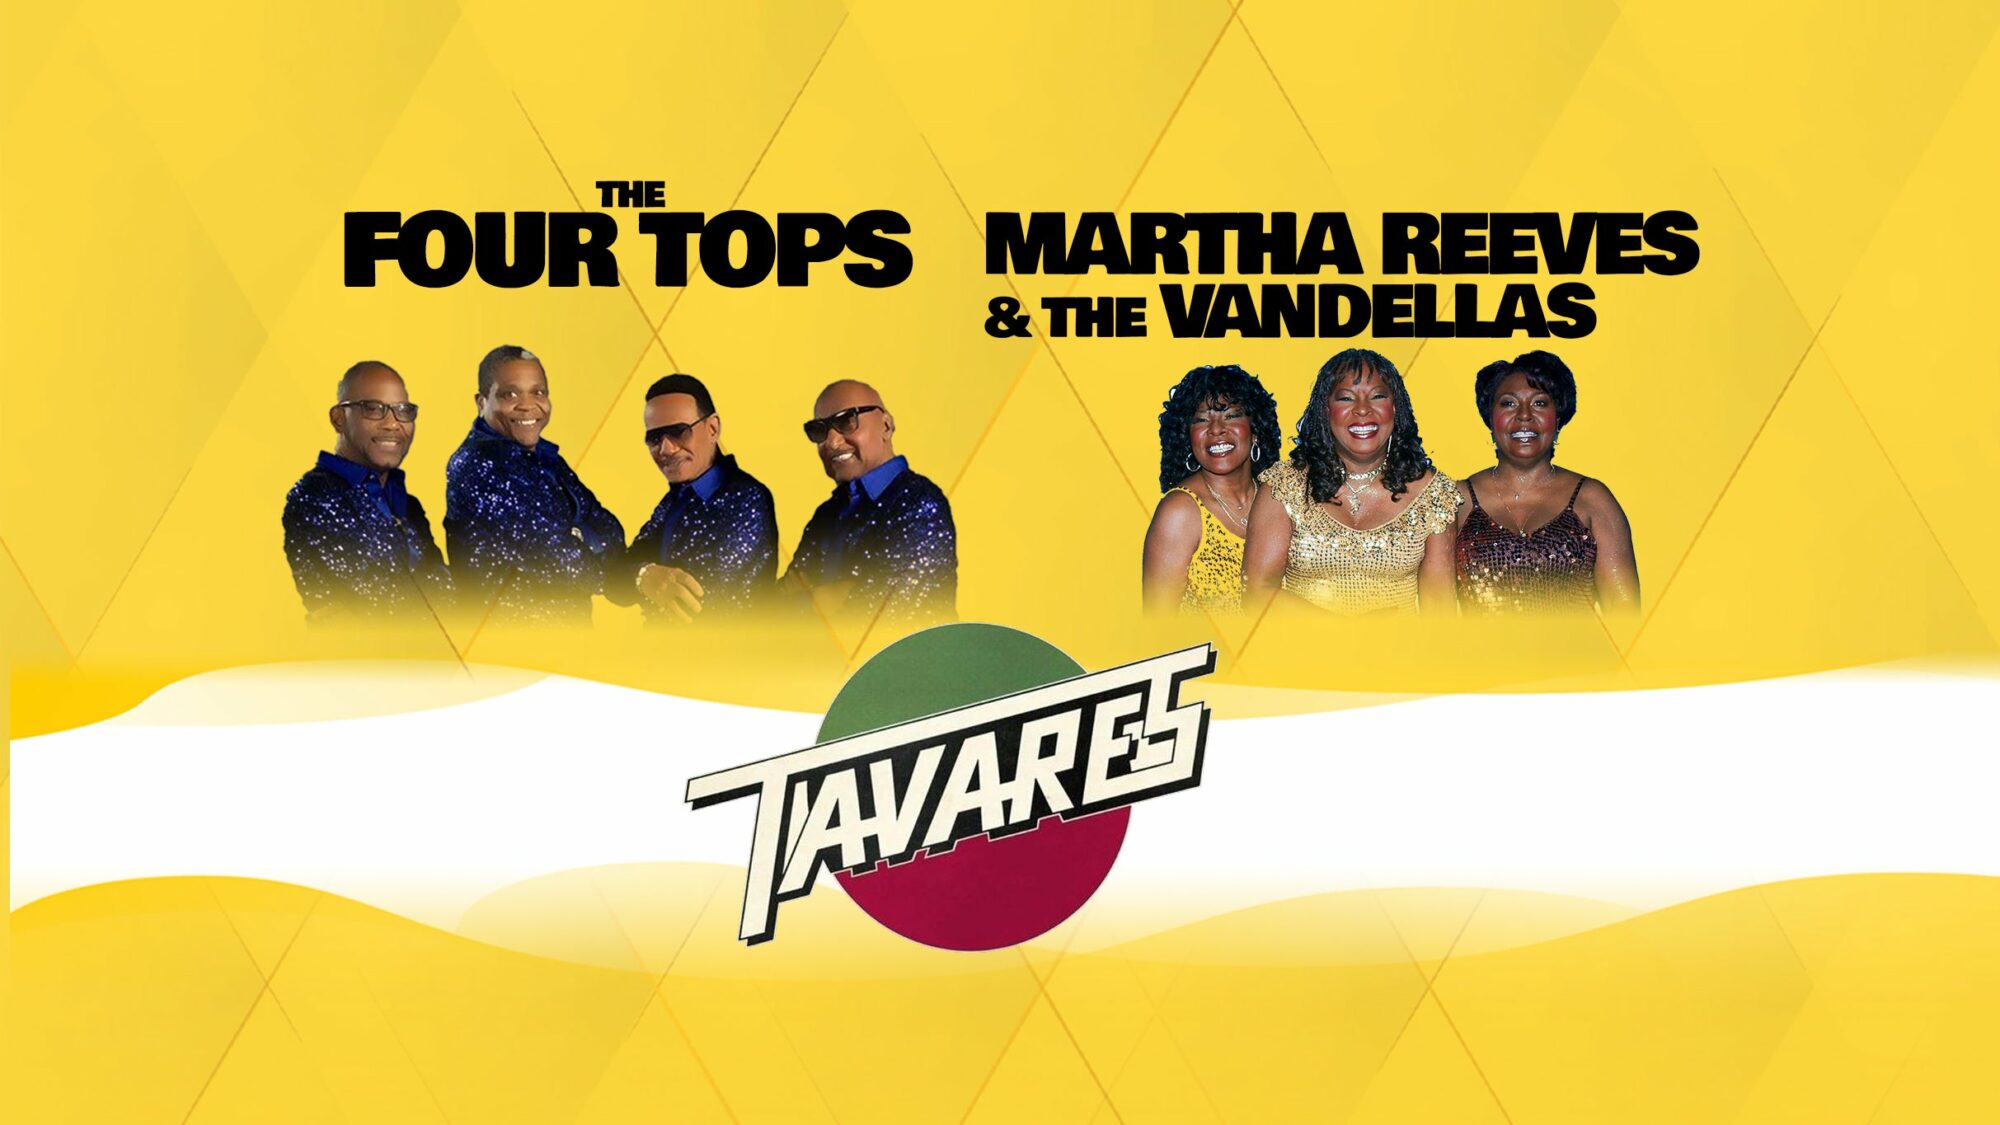 Image name The Four Tops Tavares Martha Reeves the Vandellas at Connexin Live Hull the 7 image from the post Events in Yorkshire.com.